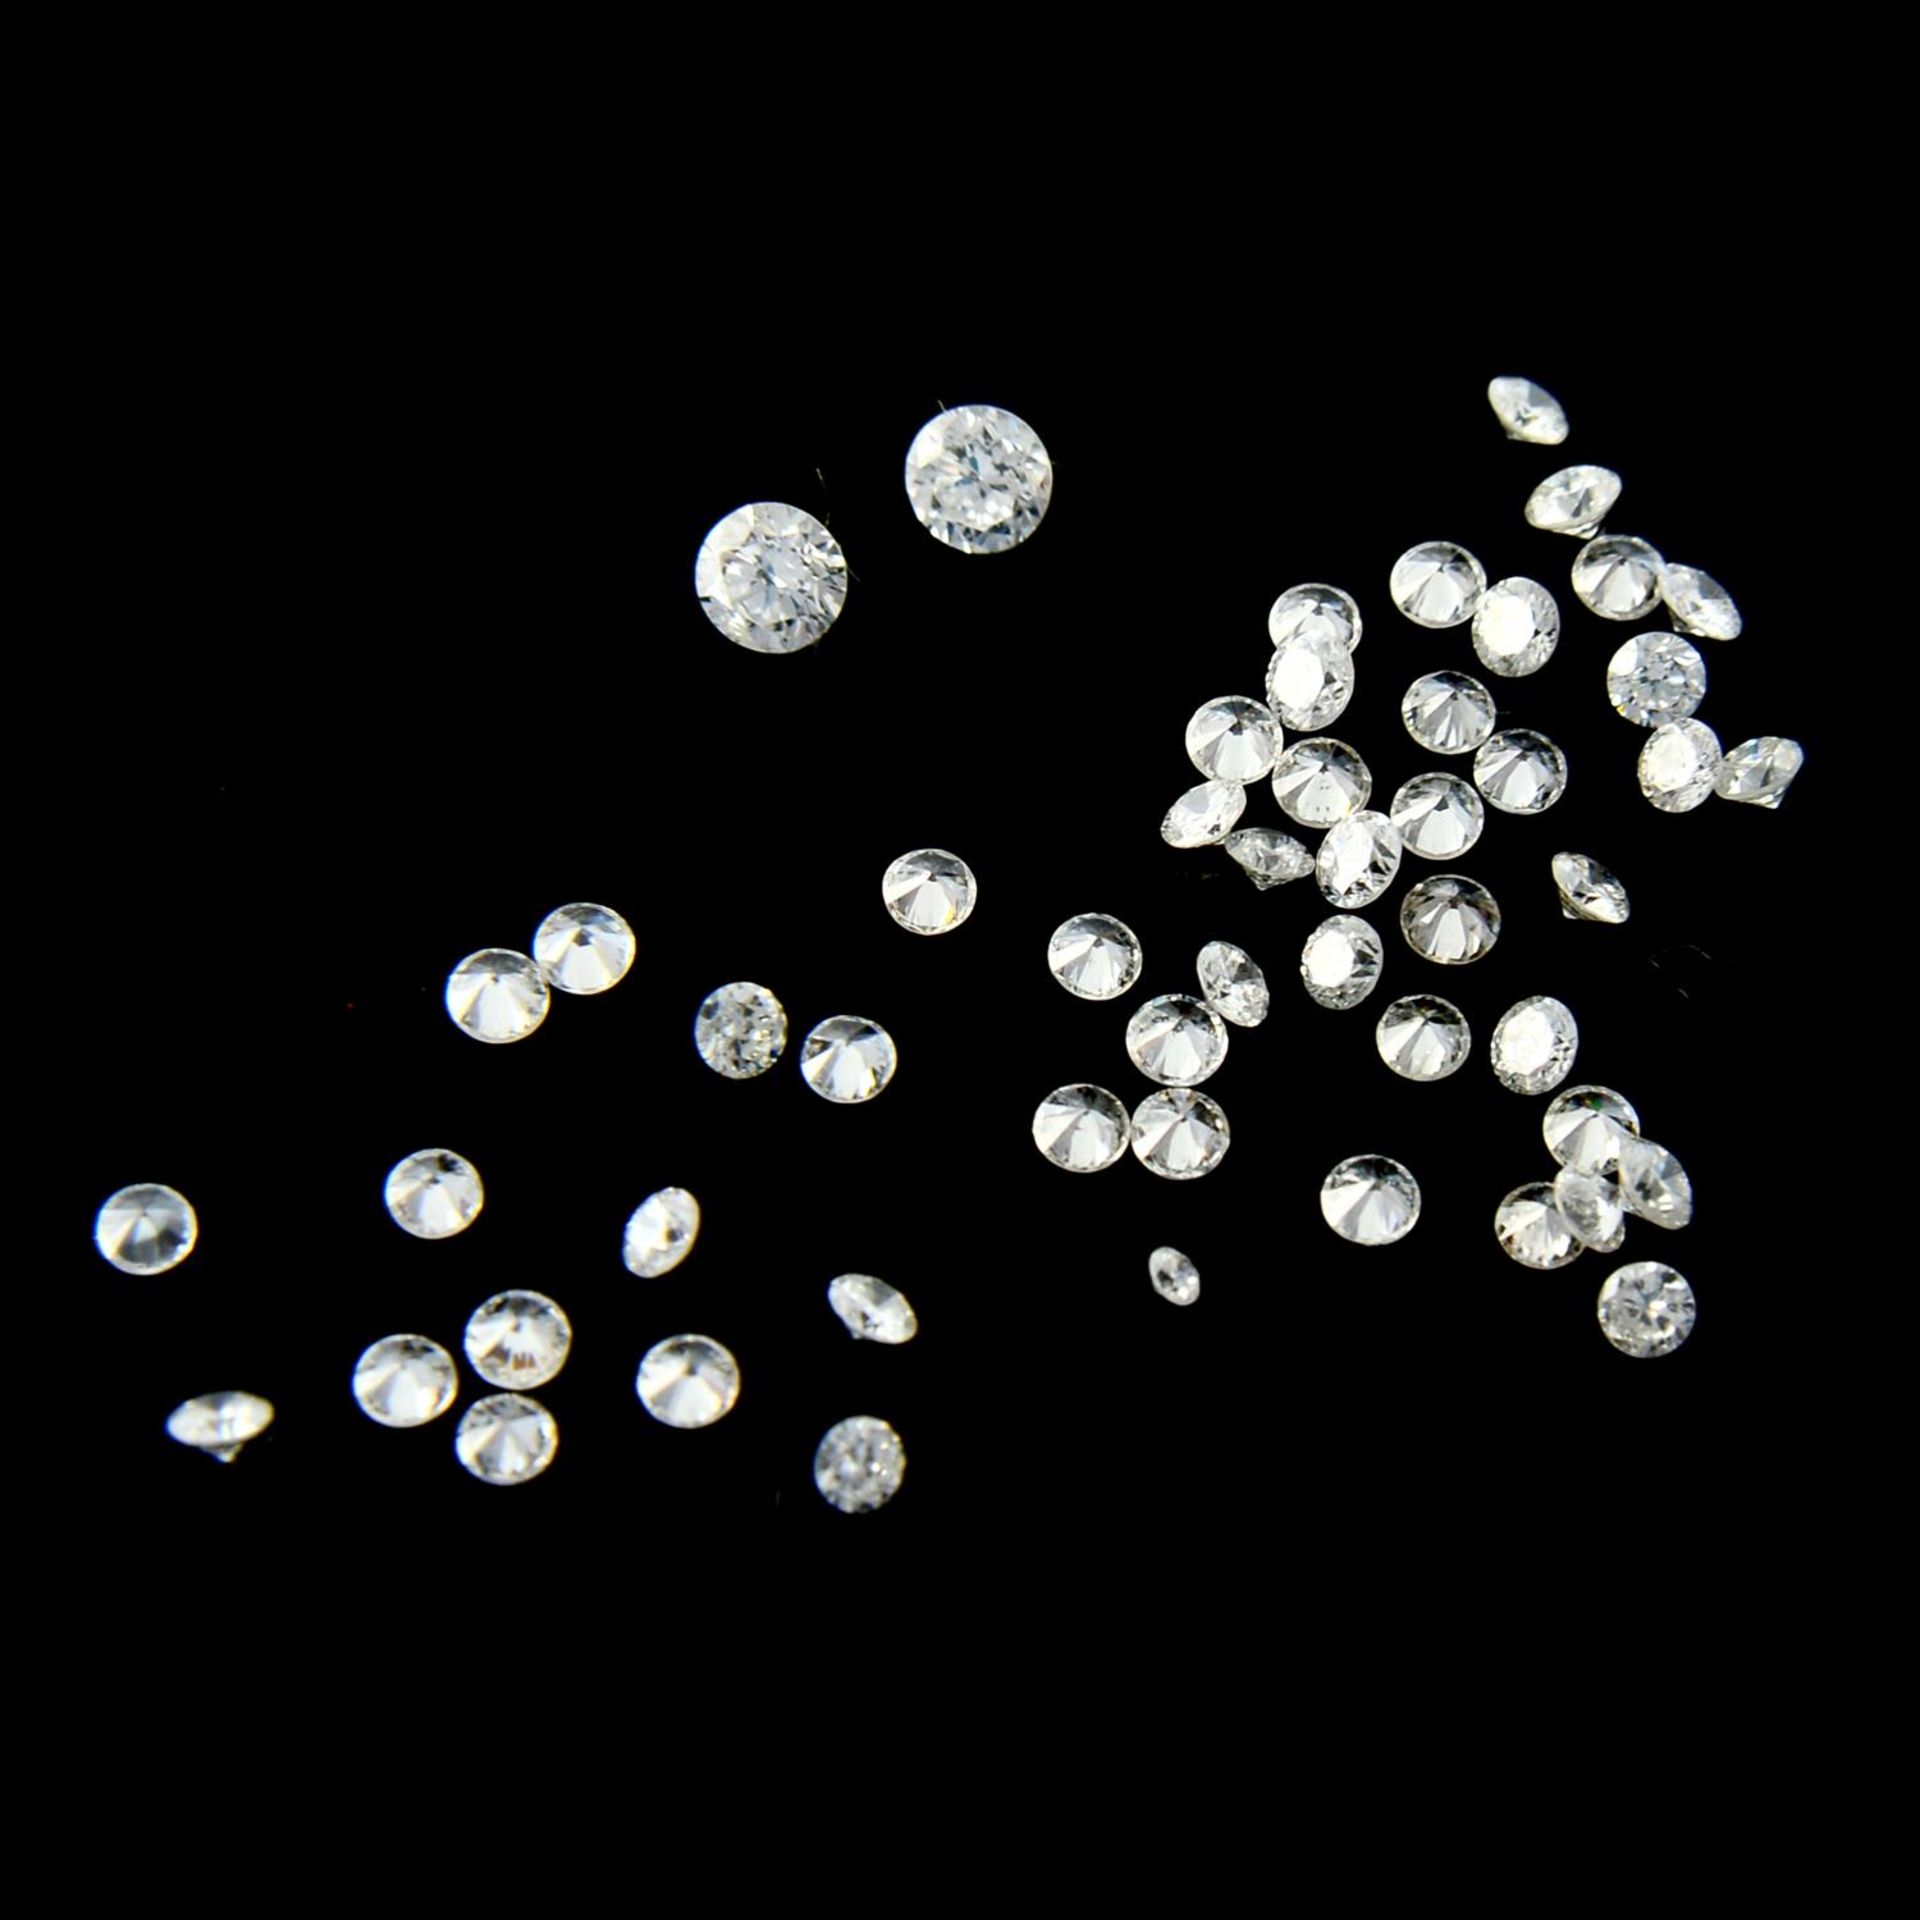 Selection of brilliant cut diamonds, weighing 4.73ct